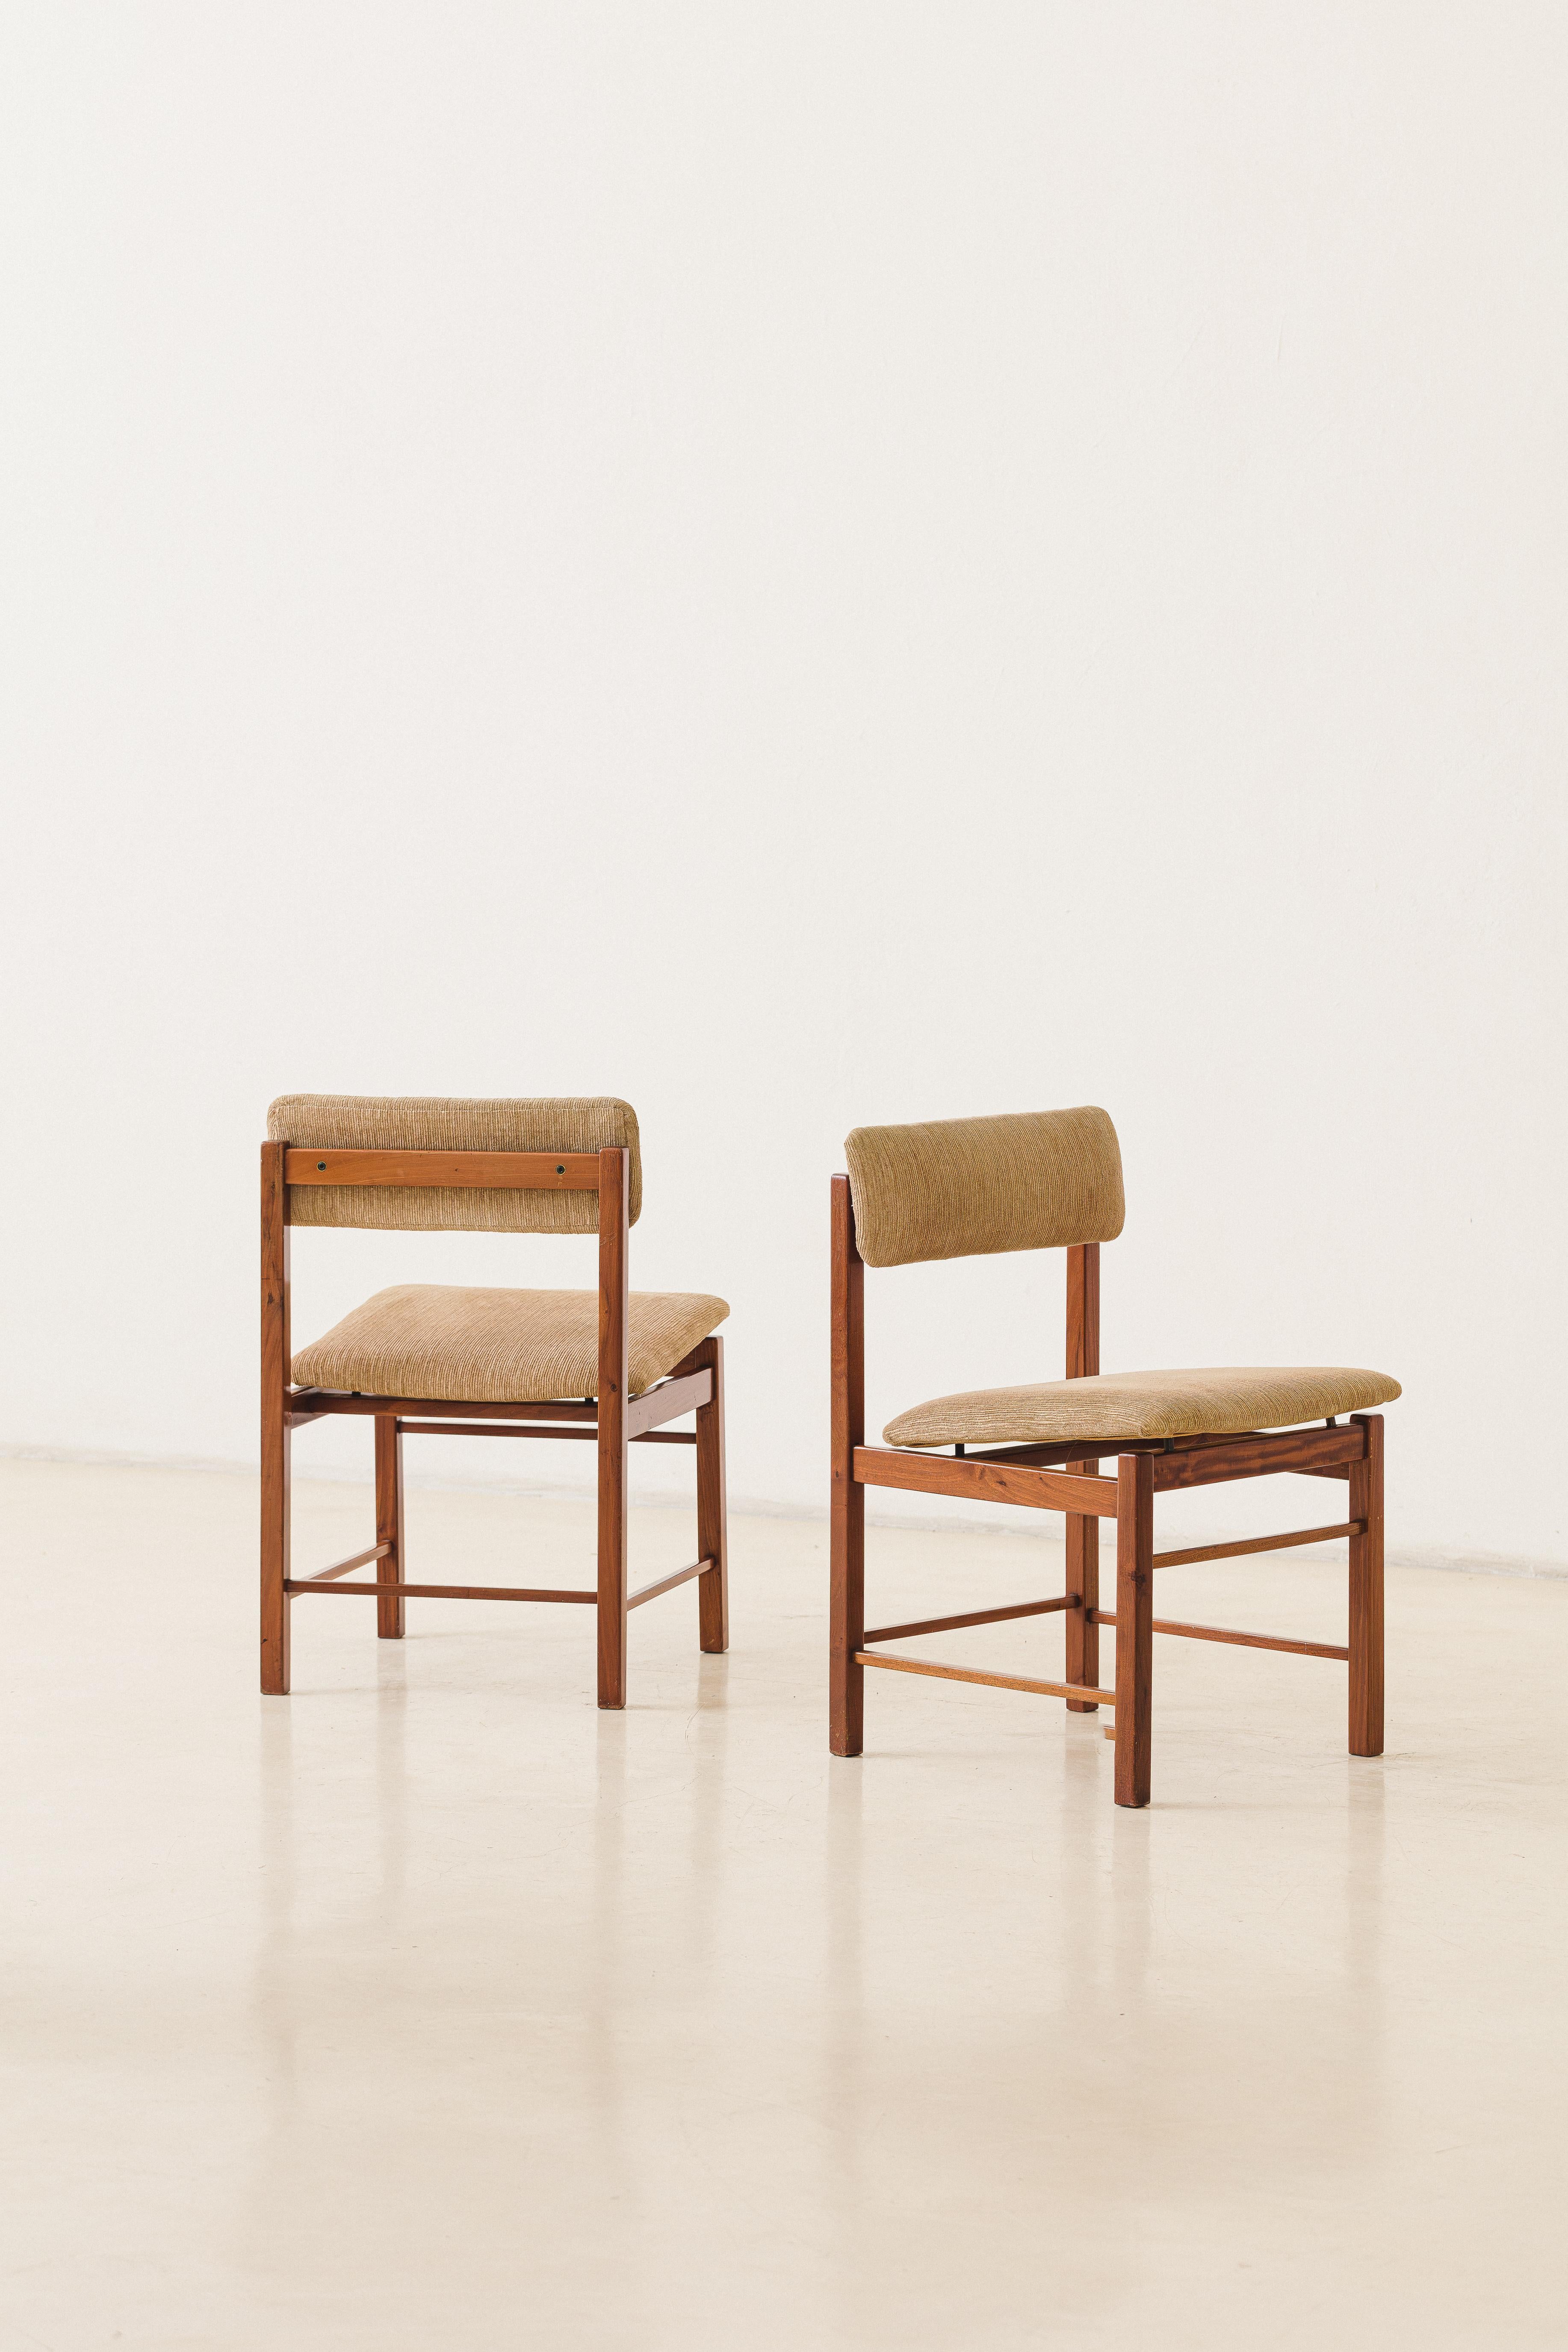 Set of Six Dining Chairs by Ernesto Hauner, Freijó Wood, Mobilinea, 1960s For Sale 1